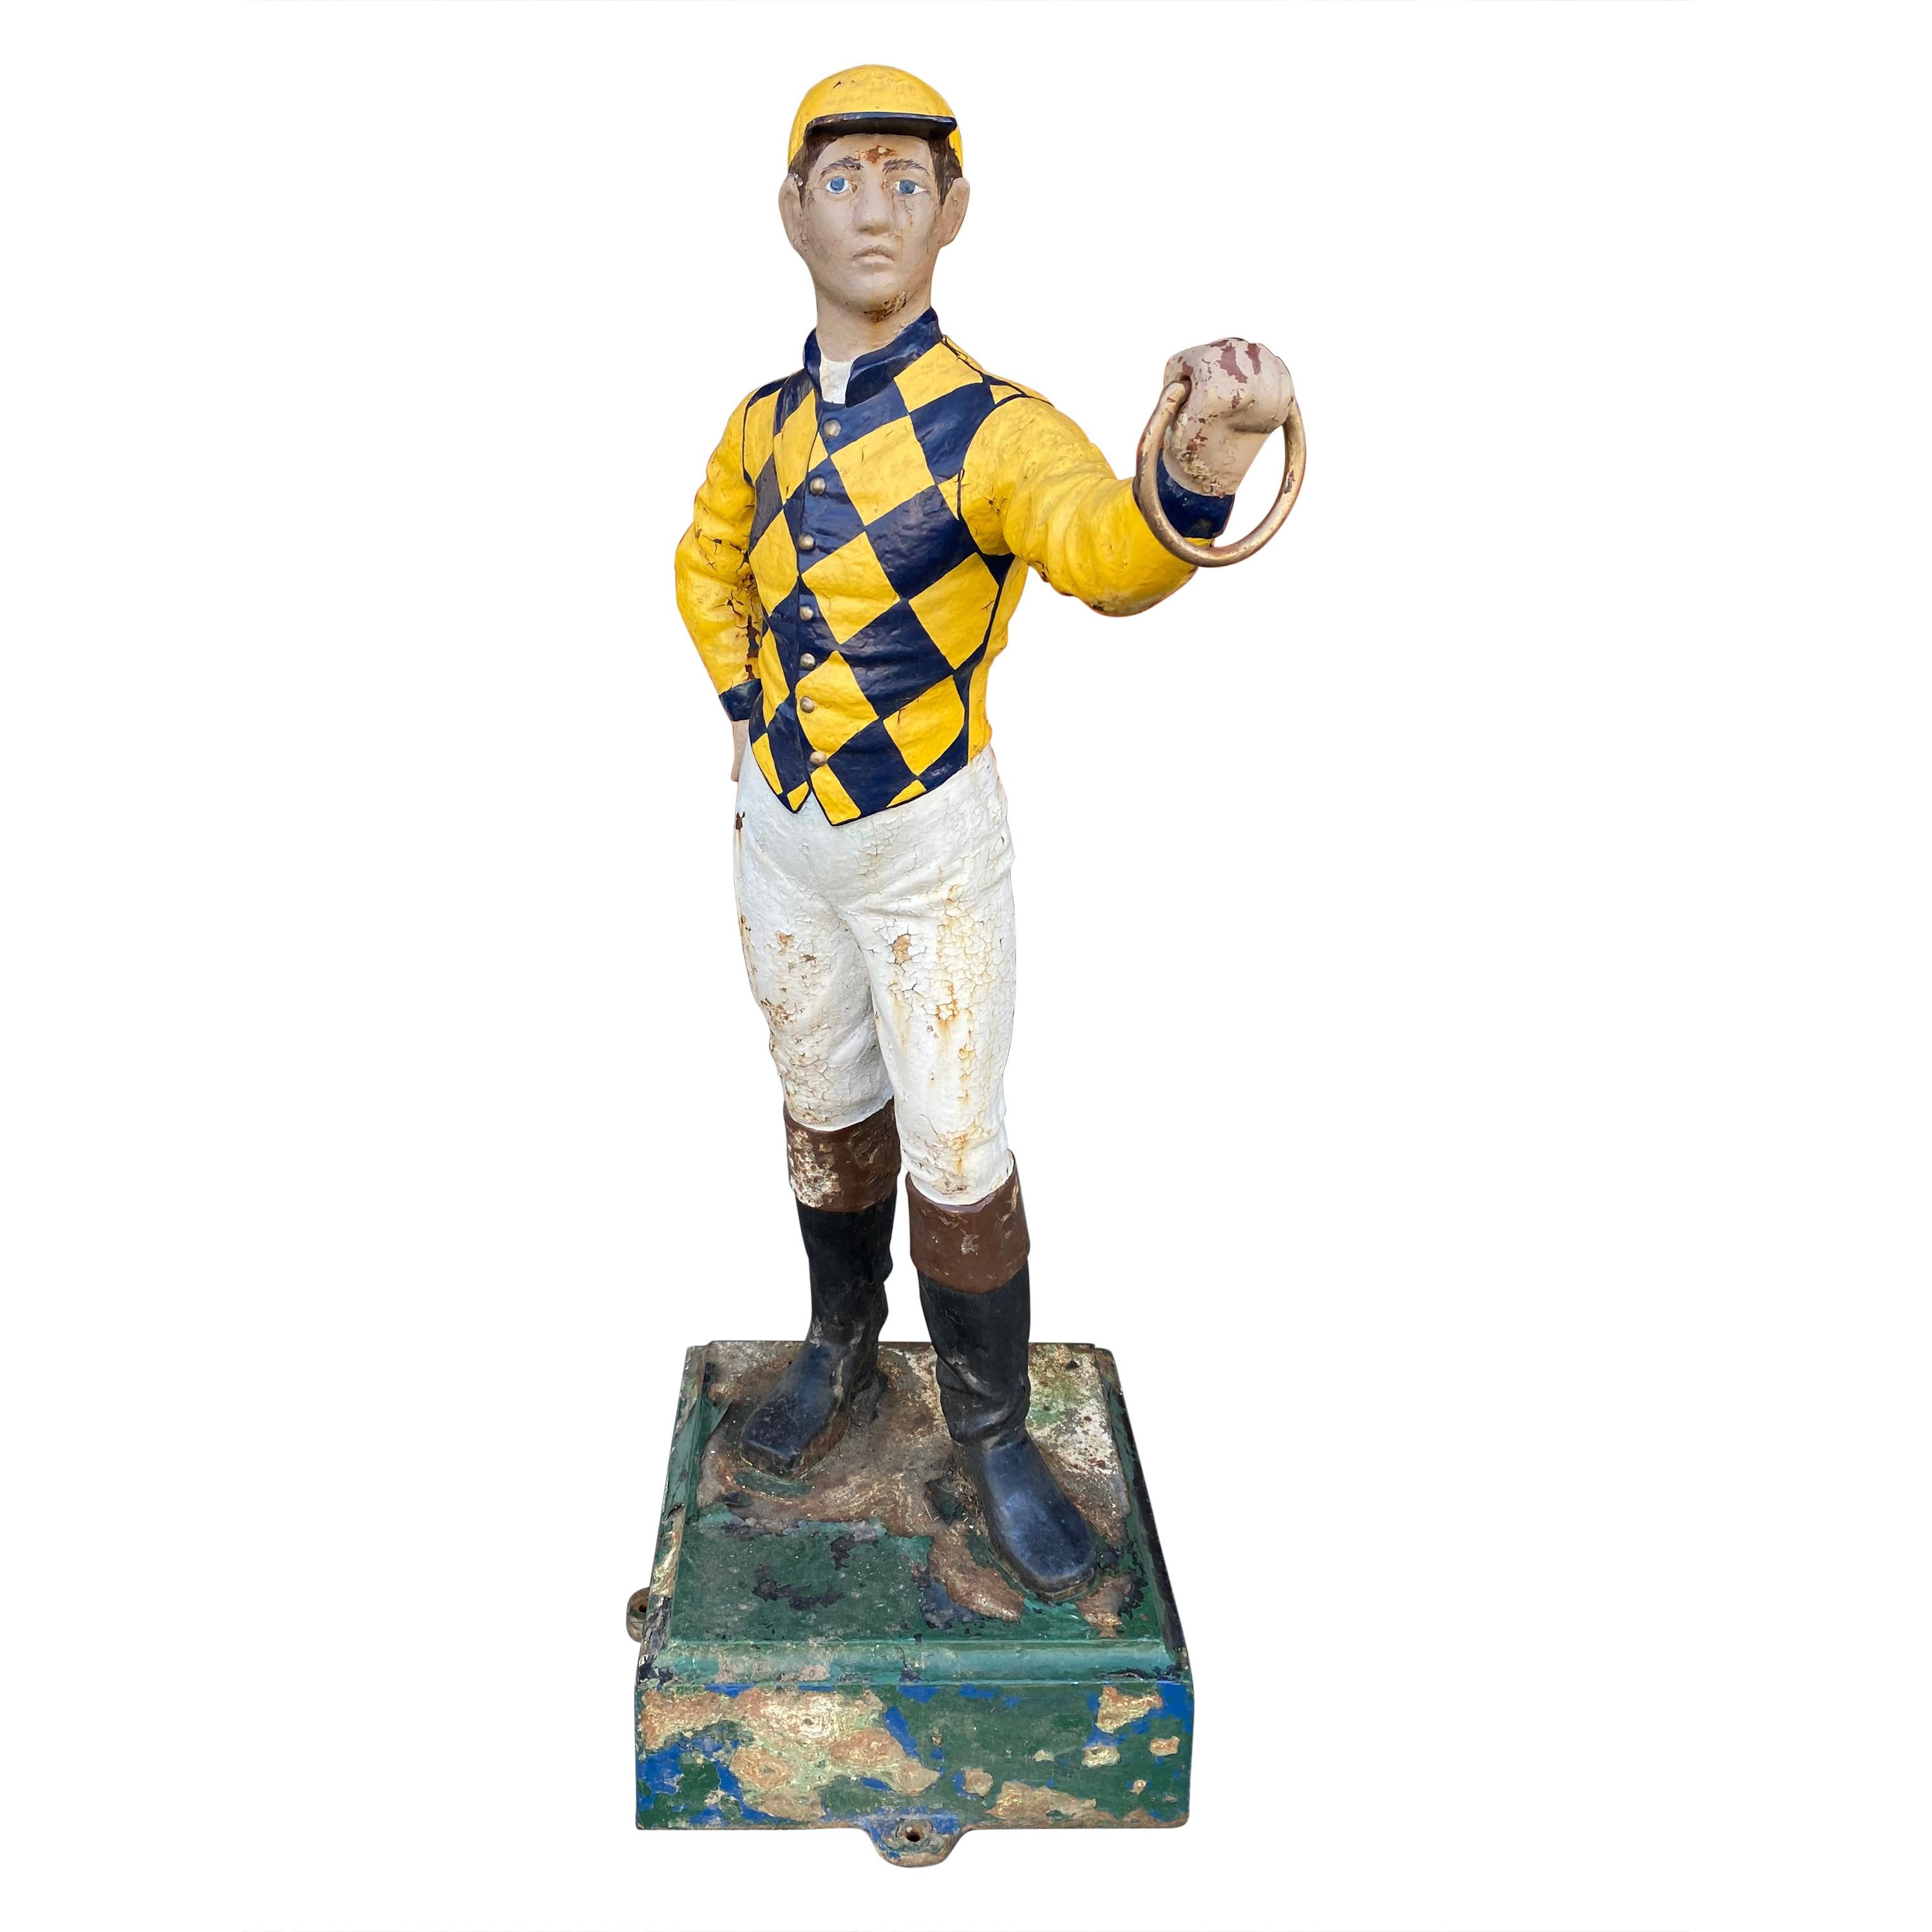 Cast Iron Lawn Jockey from the 1900s, in Great Paint